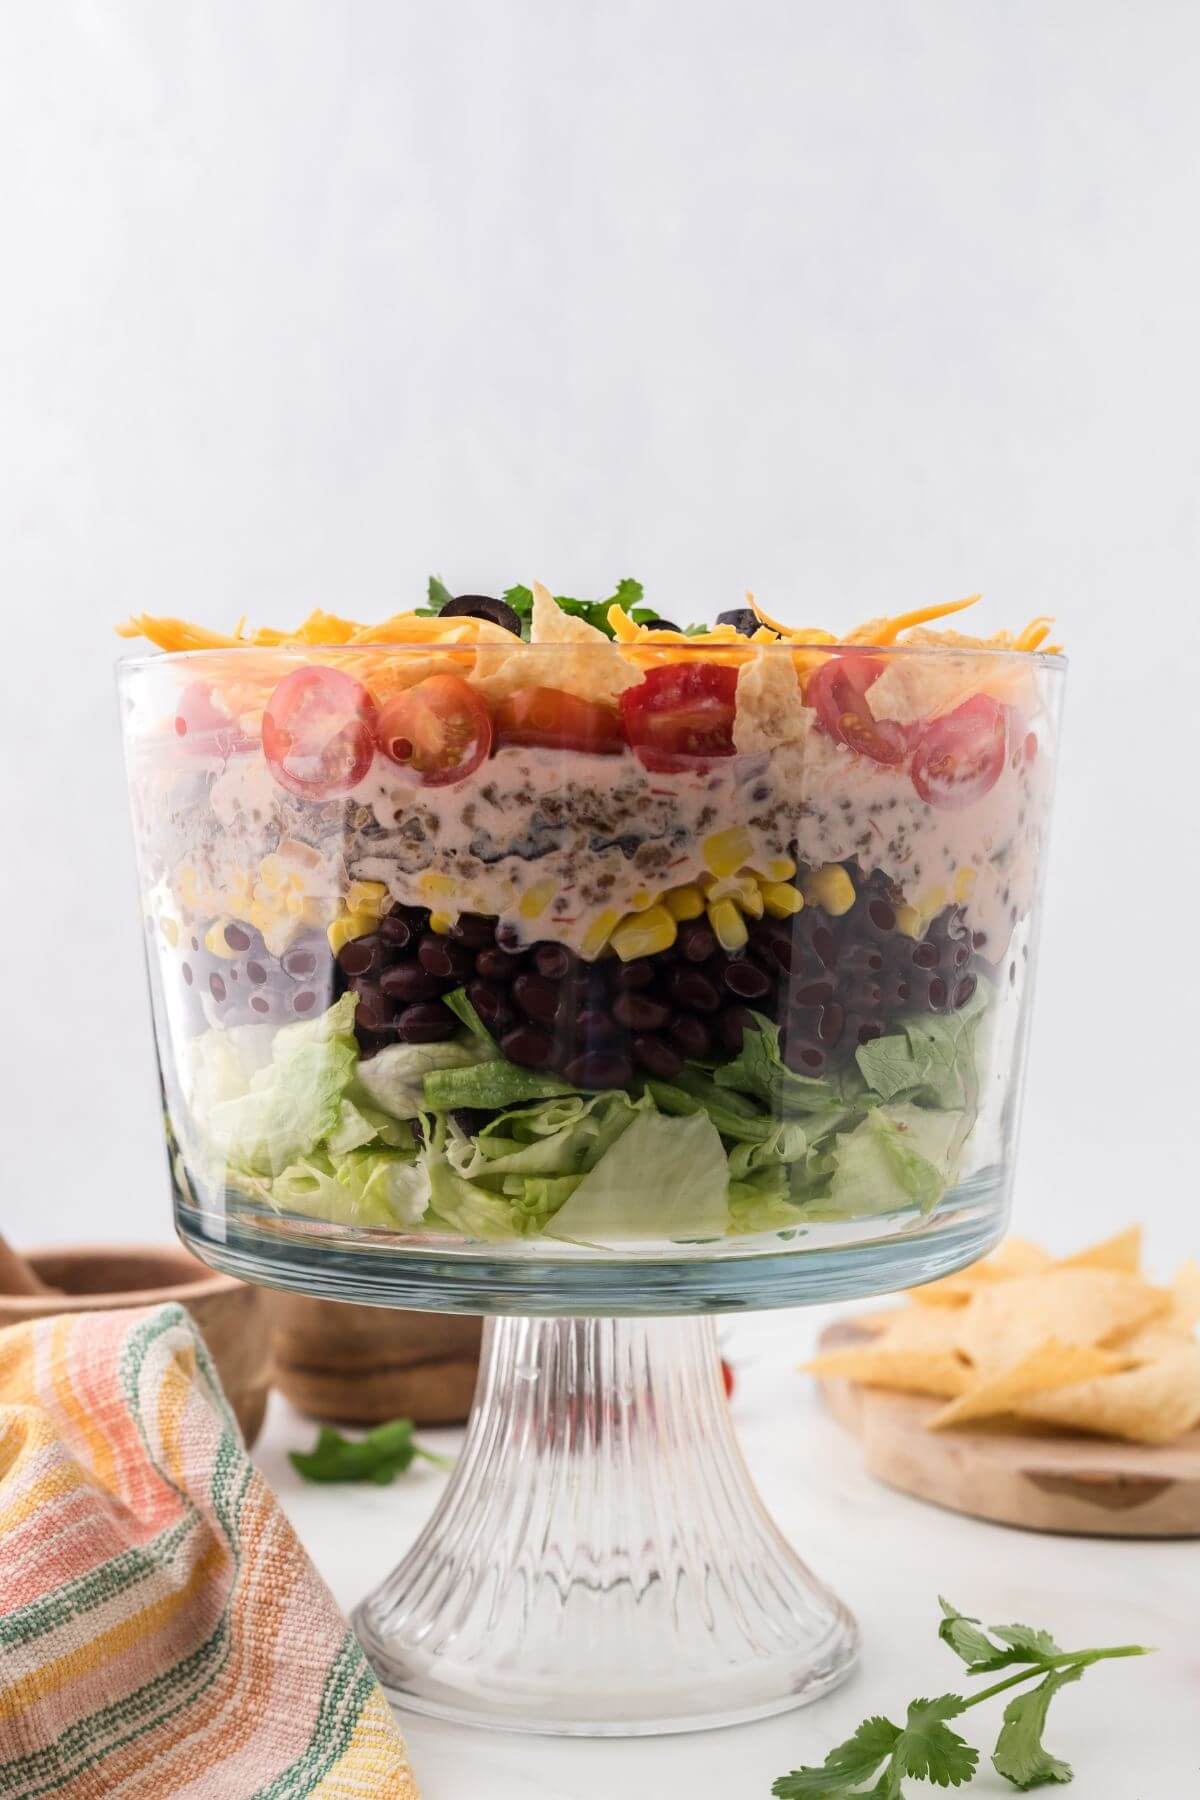 A side view of a filled glass dish shows salad with beans, corn, tomatoes, cheese, and beef.